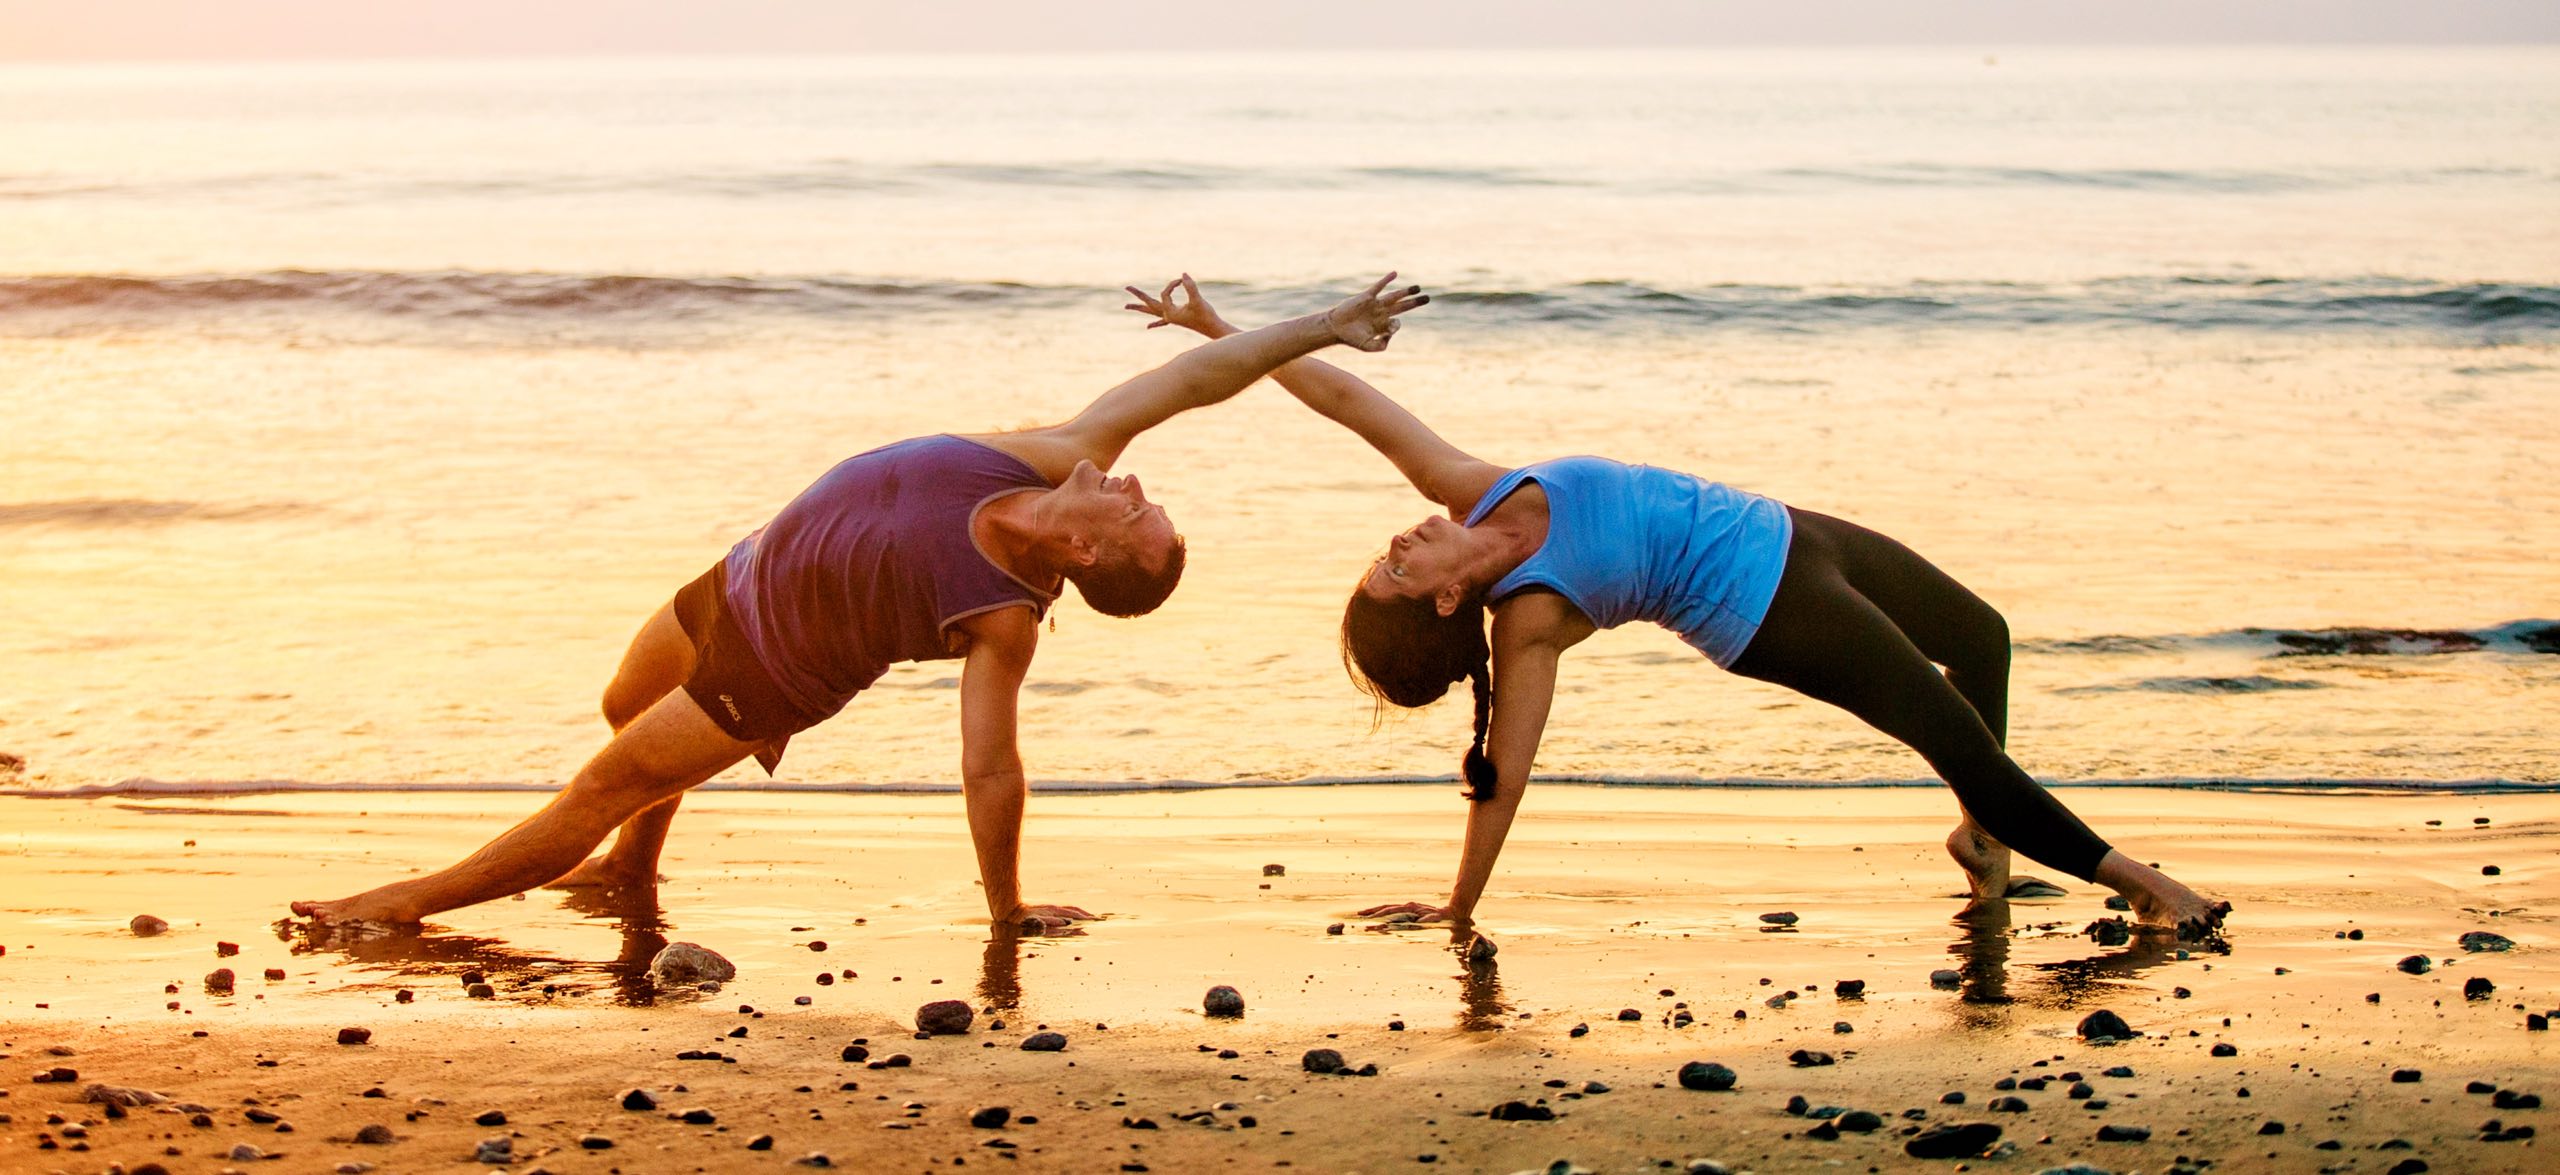 Yoga Sequences: What Order Should You Do Yoga Poses?